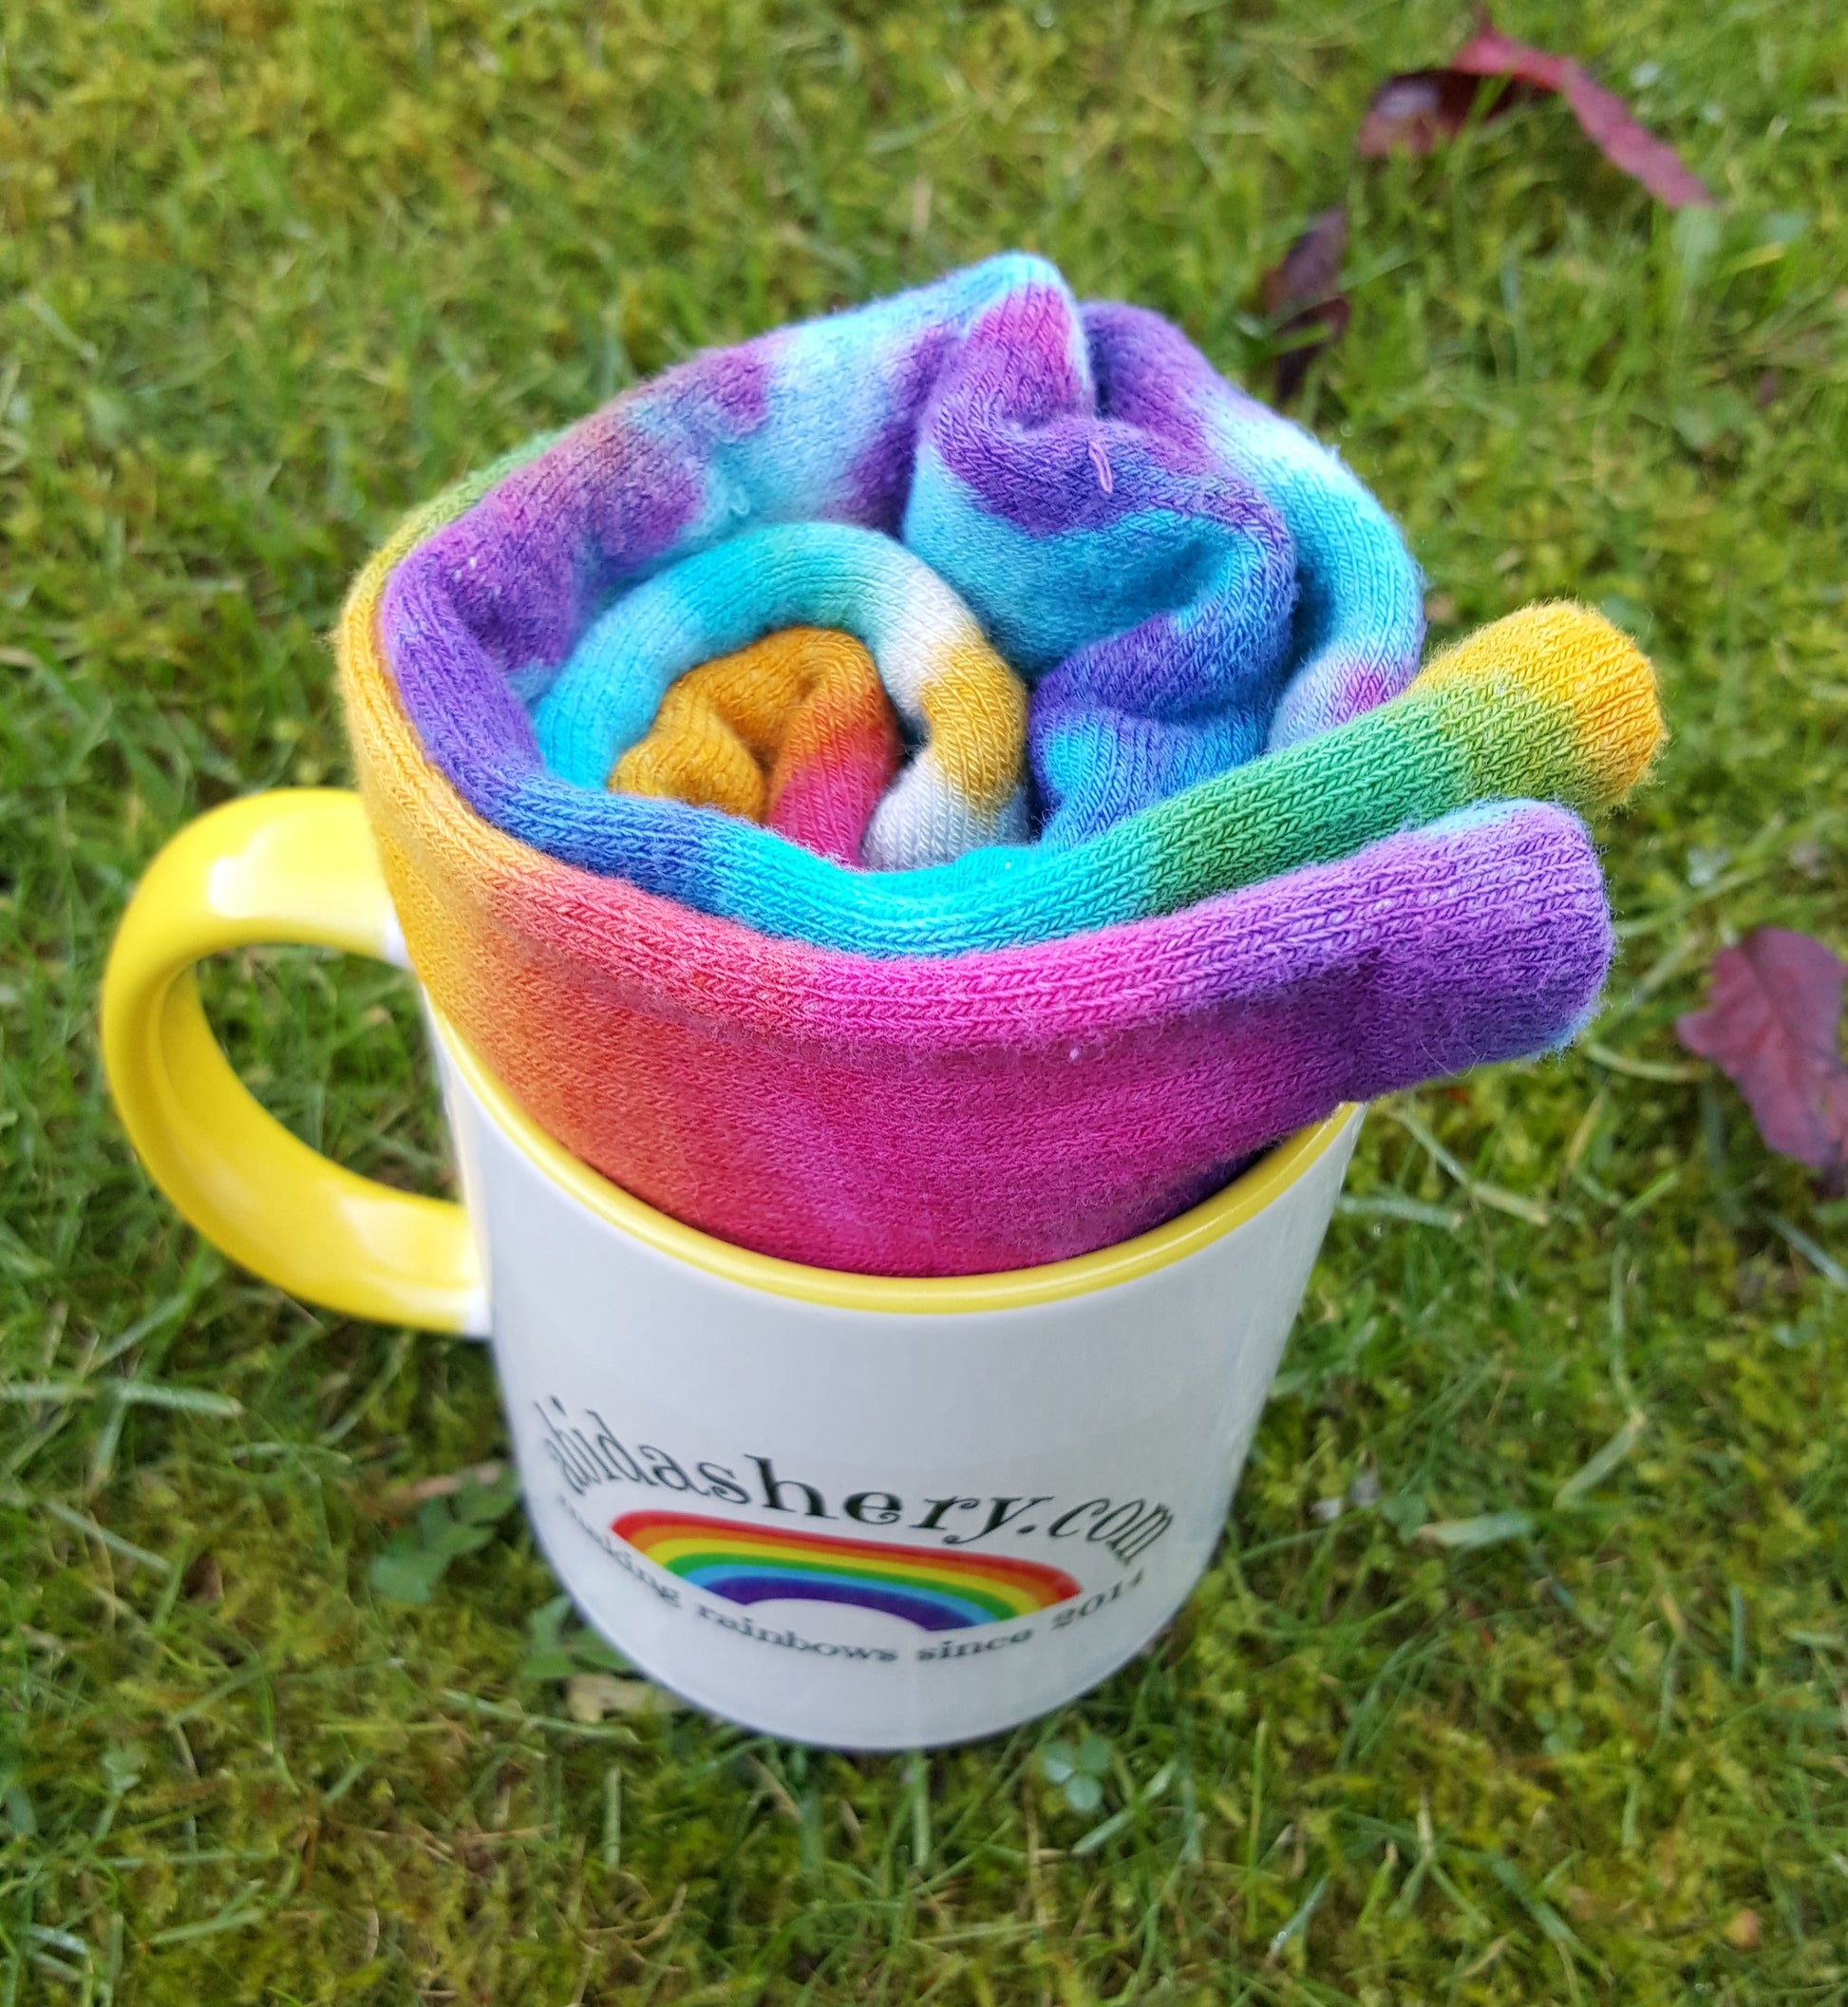 Bring some sunshine to someone's day with this colourful, unique gift set!  Bamboo tie dye unisex sports socks with AbiDashery mug gift set, available in bright or dark shades.  To fit unisex size UK 4-8 / UK 9-12 - in breathable bamboo cotton.